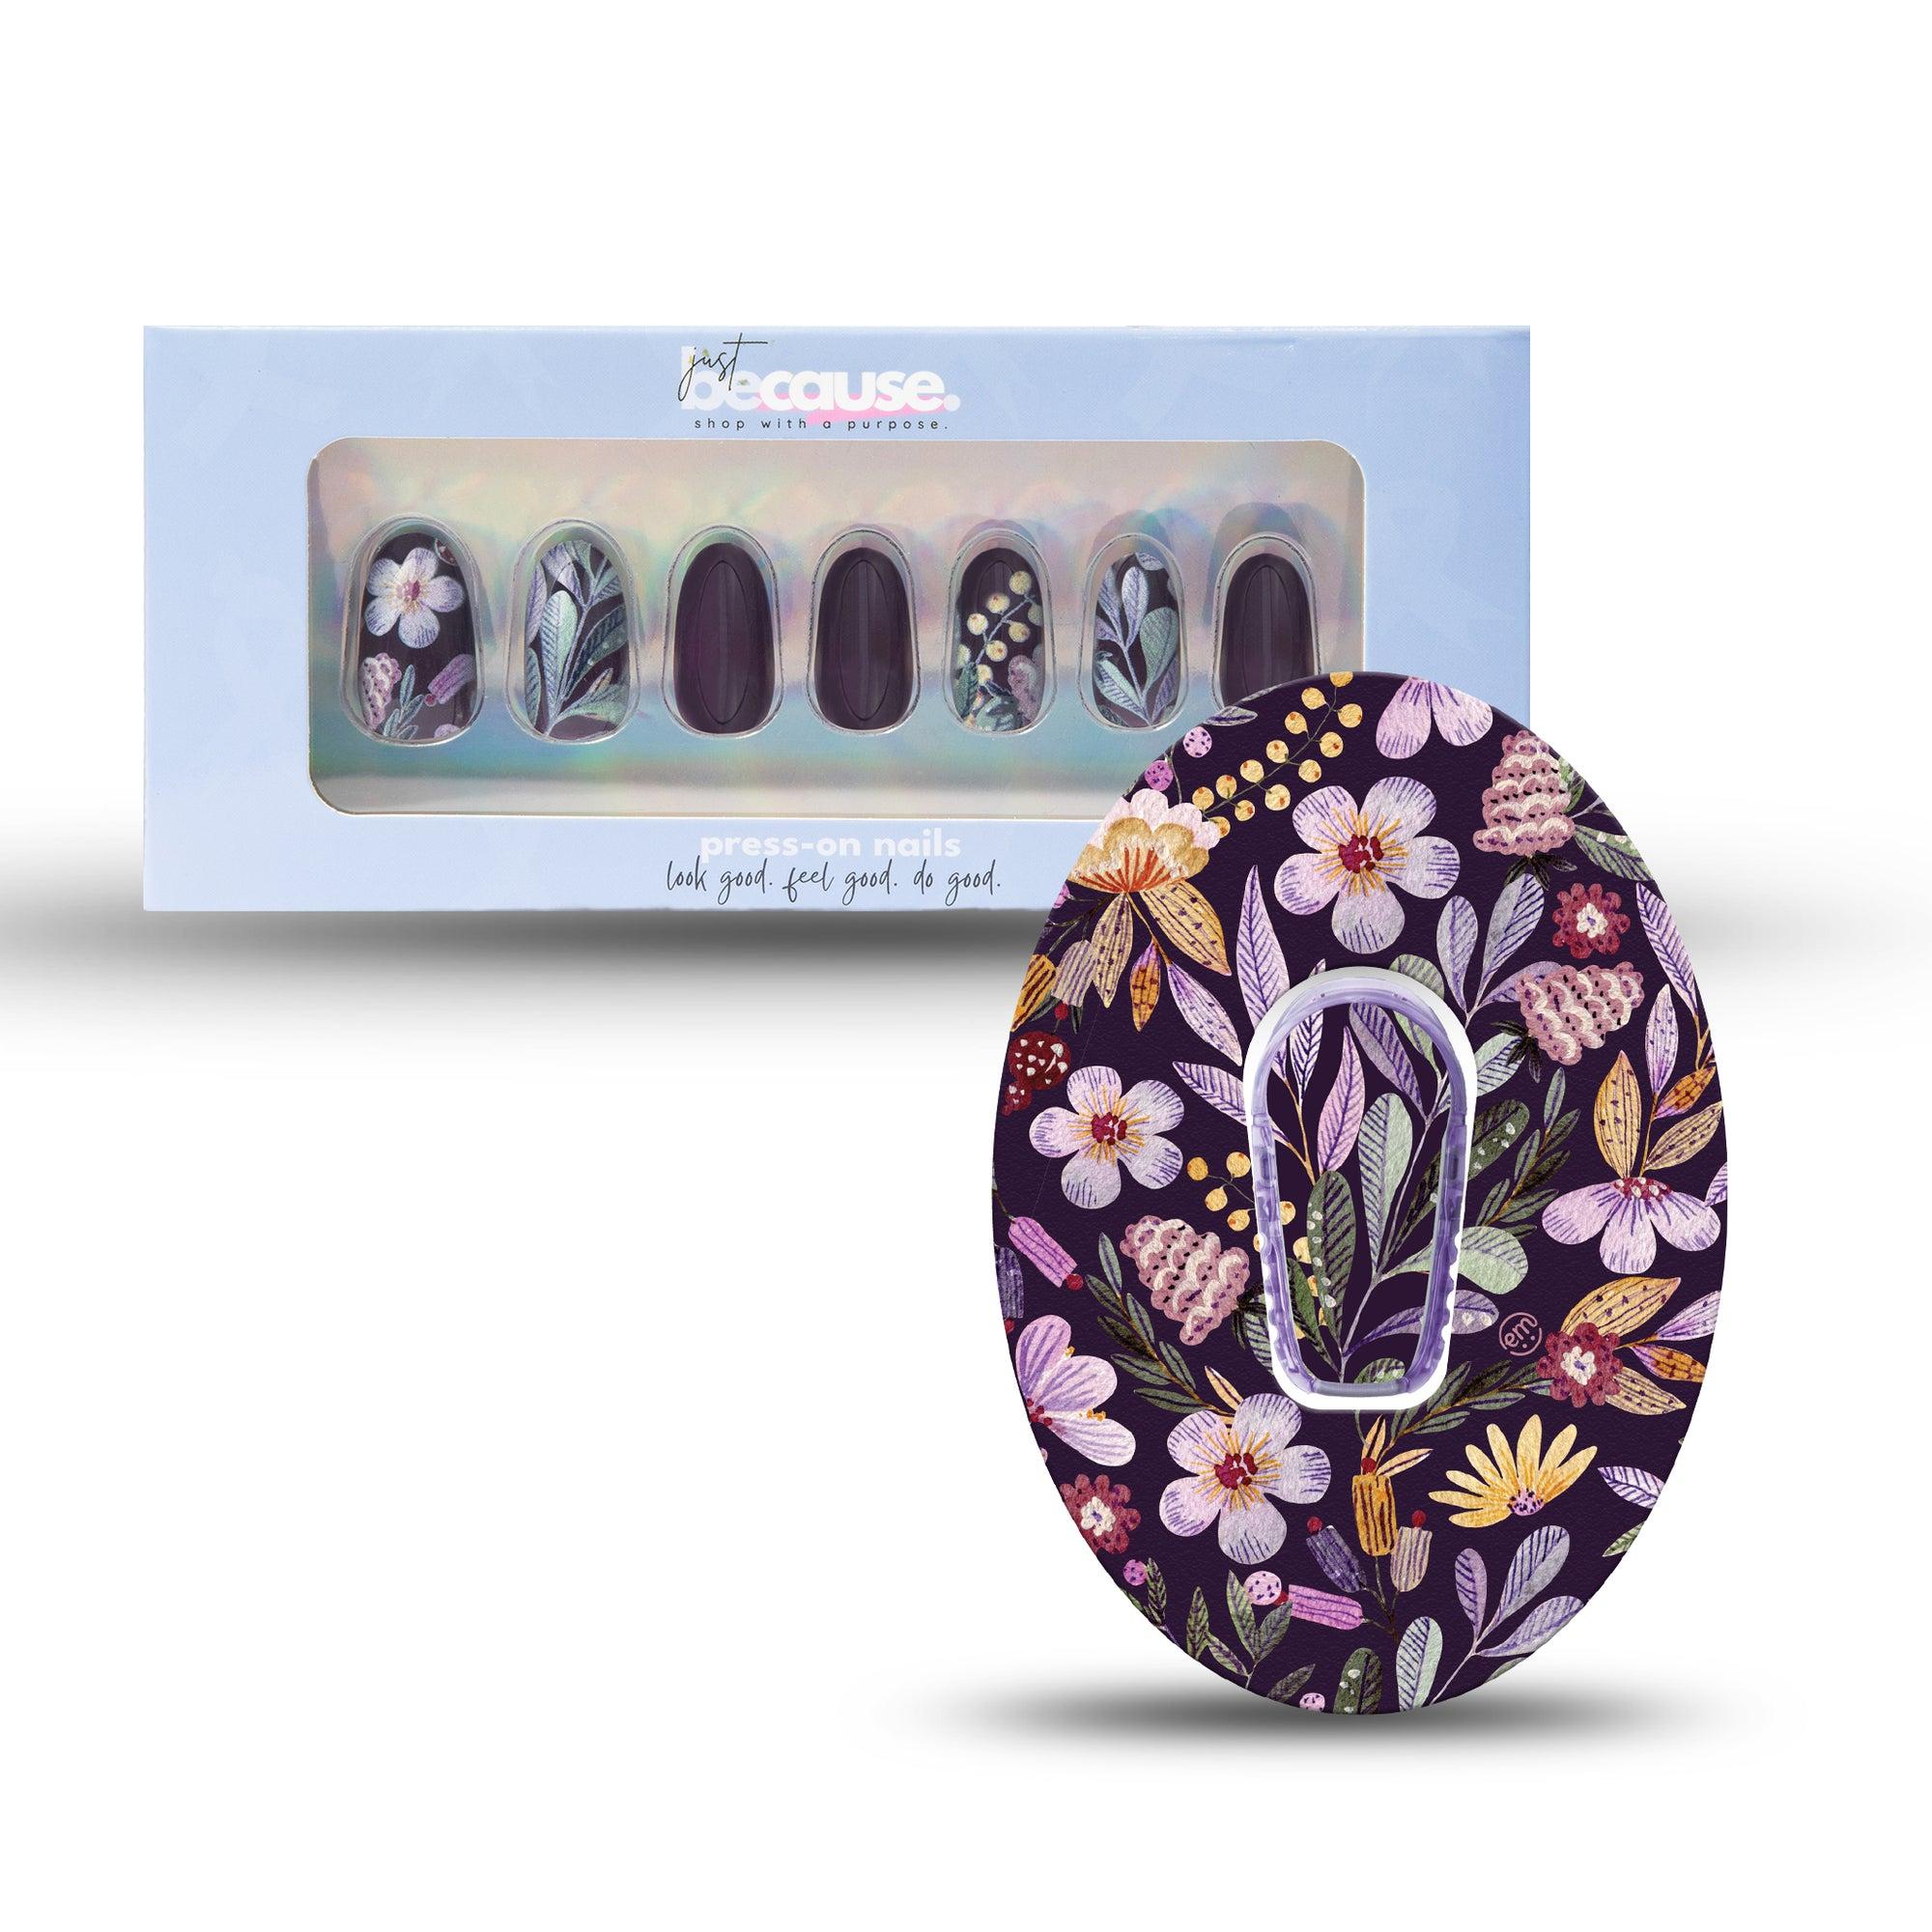 ExpressionMed Just BeCause 24 Pcs ABS Press on nails Medium, Moody Blooms Fake Nails set with matching dark purple floral Dexcom G6 Overlay Patch and Center Sticker, Support T1D - ExpressionMed.com	